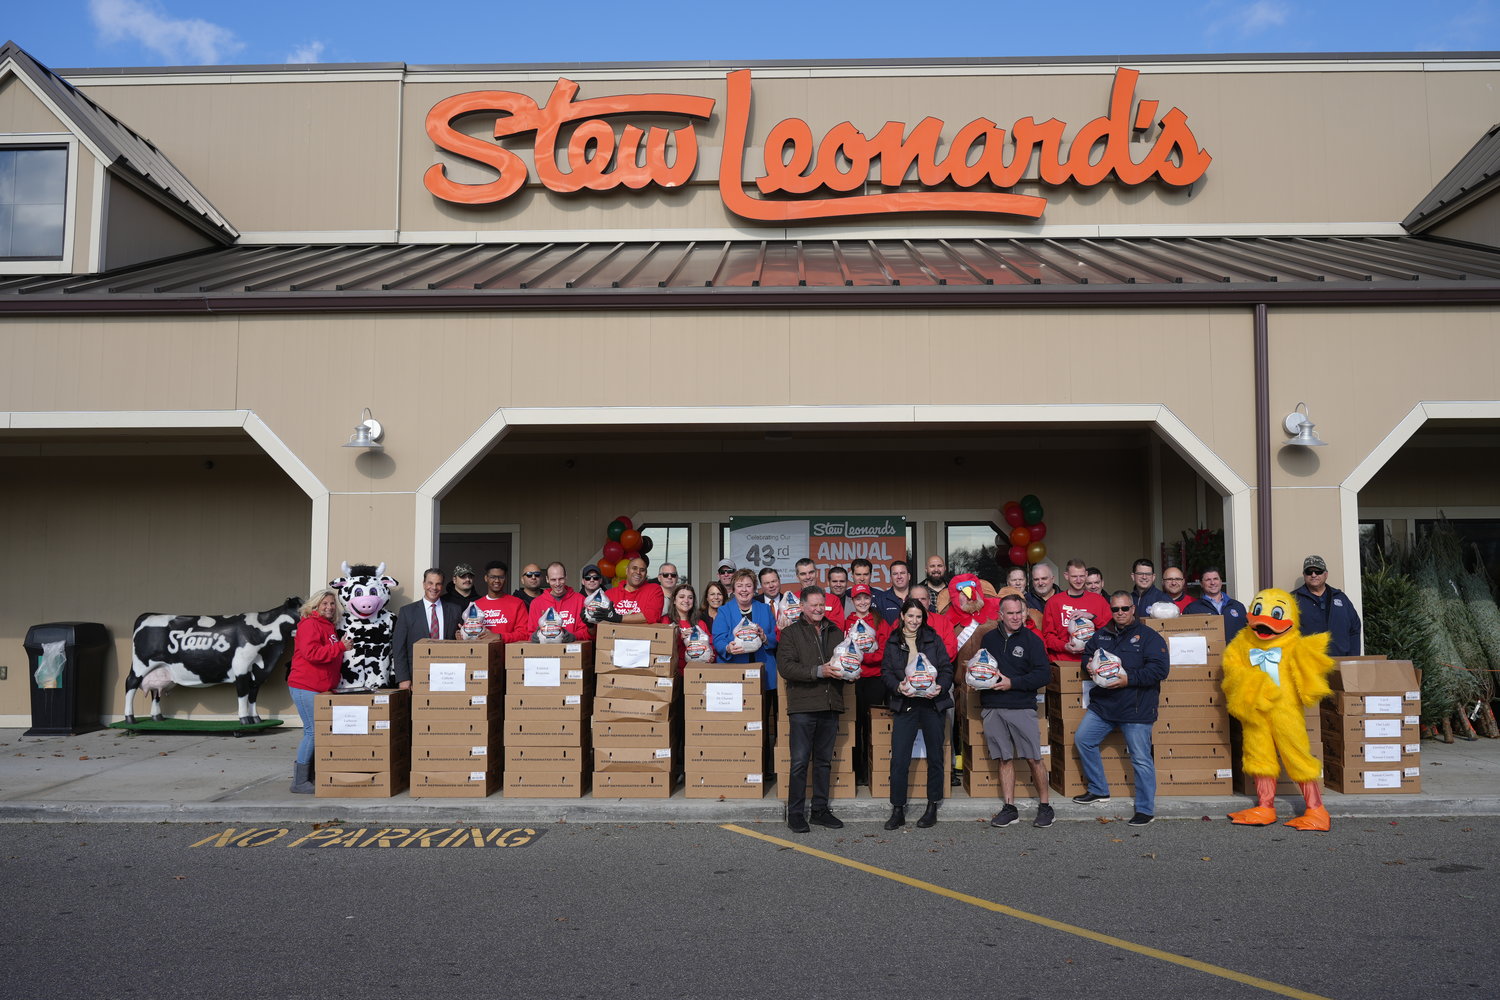 Members of the East Meadow Fire Department, local elected officials, members of the Nassau County Police Benevolent Association, and Stew Leonard’s employees helped distribute the turkeys.